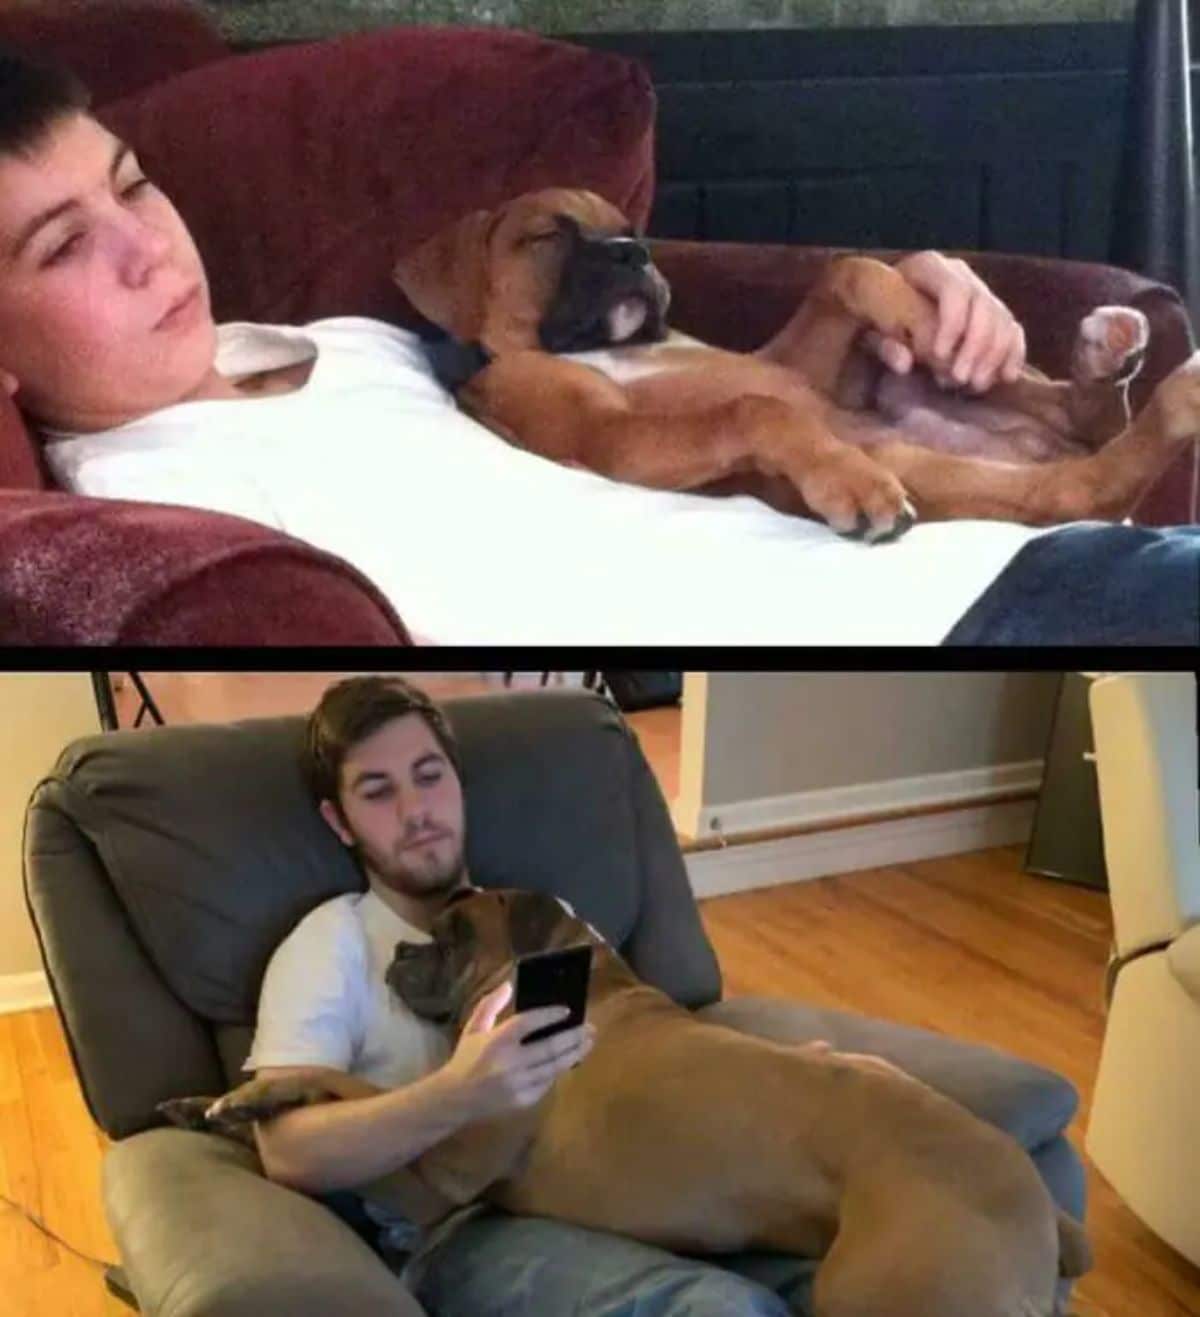 1 photo of boy laying down with brown and white boxer puppy on him and 1 photo of the same pose on brown chair with a man and the dog